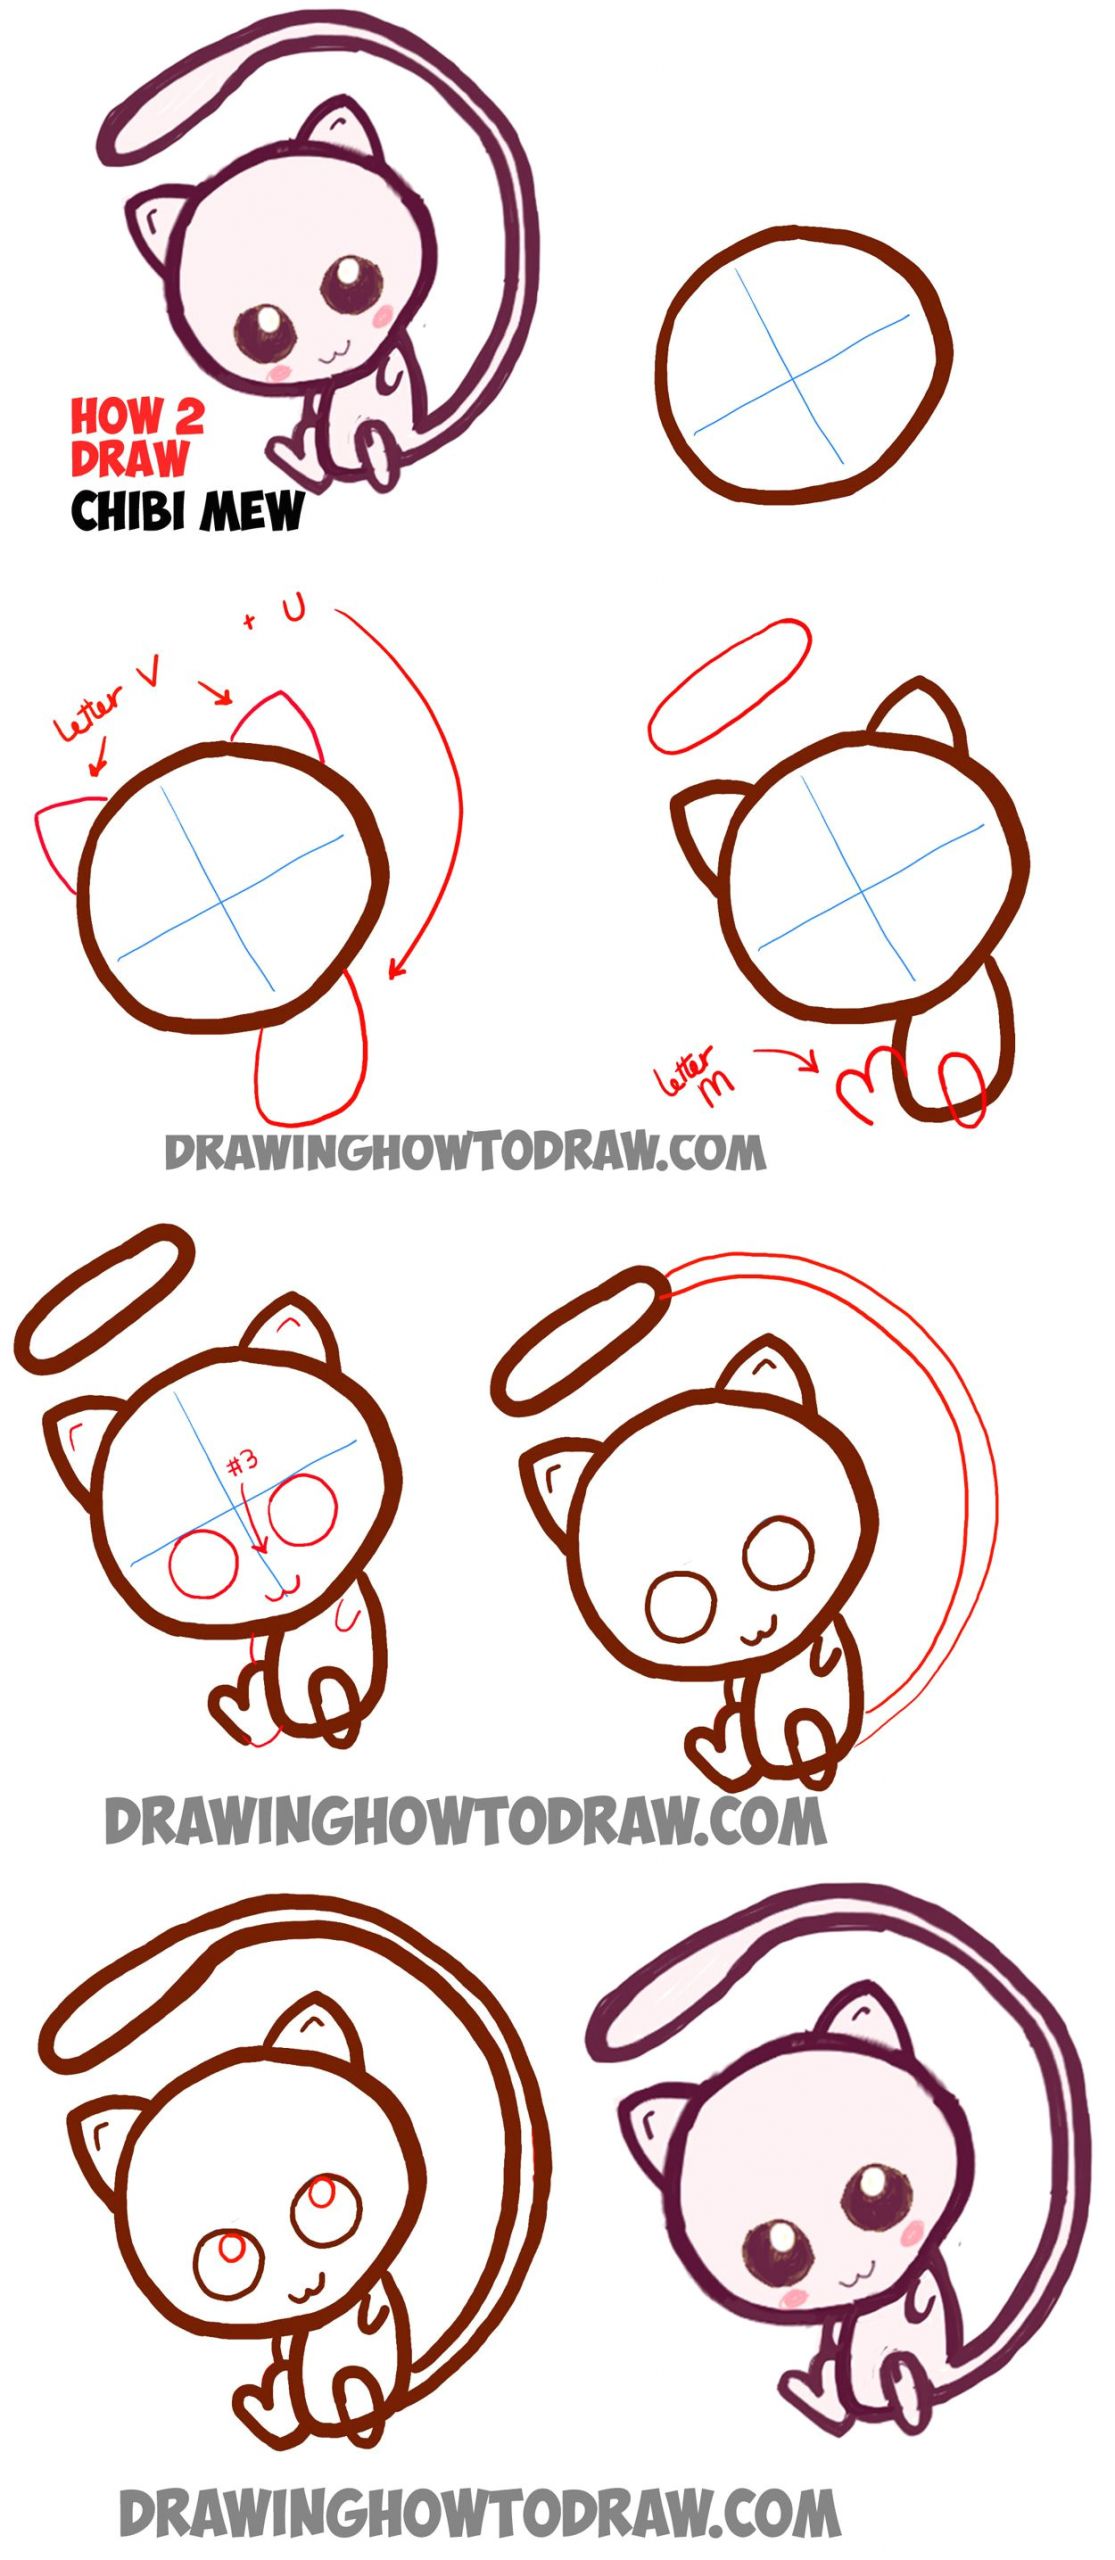 Charizard Drawing Easy How to Draw Cute Baby Chibi Mew From Pokemon Easy Step by